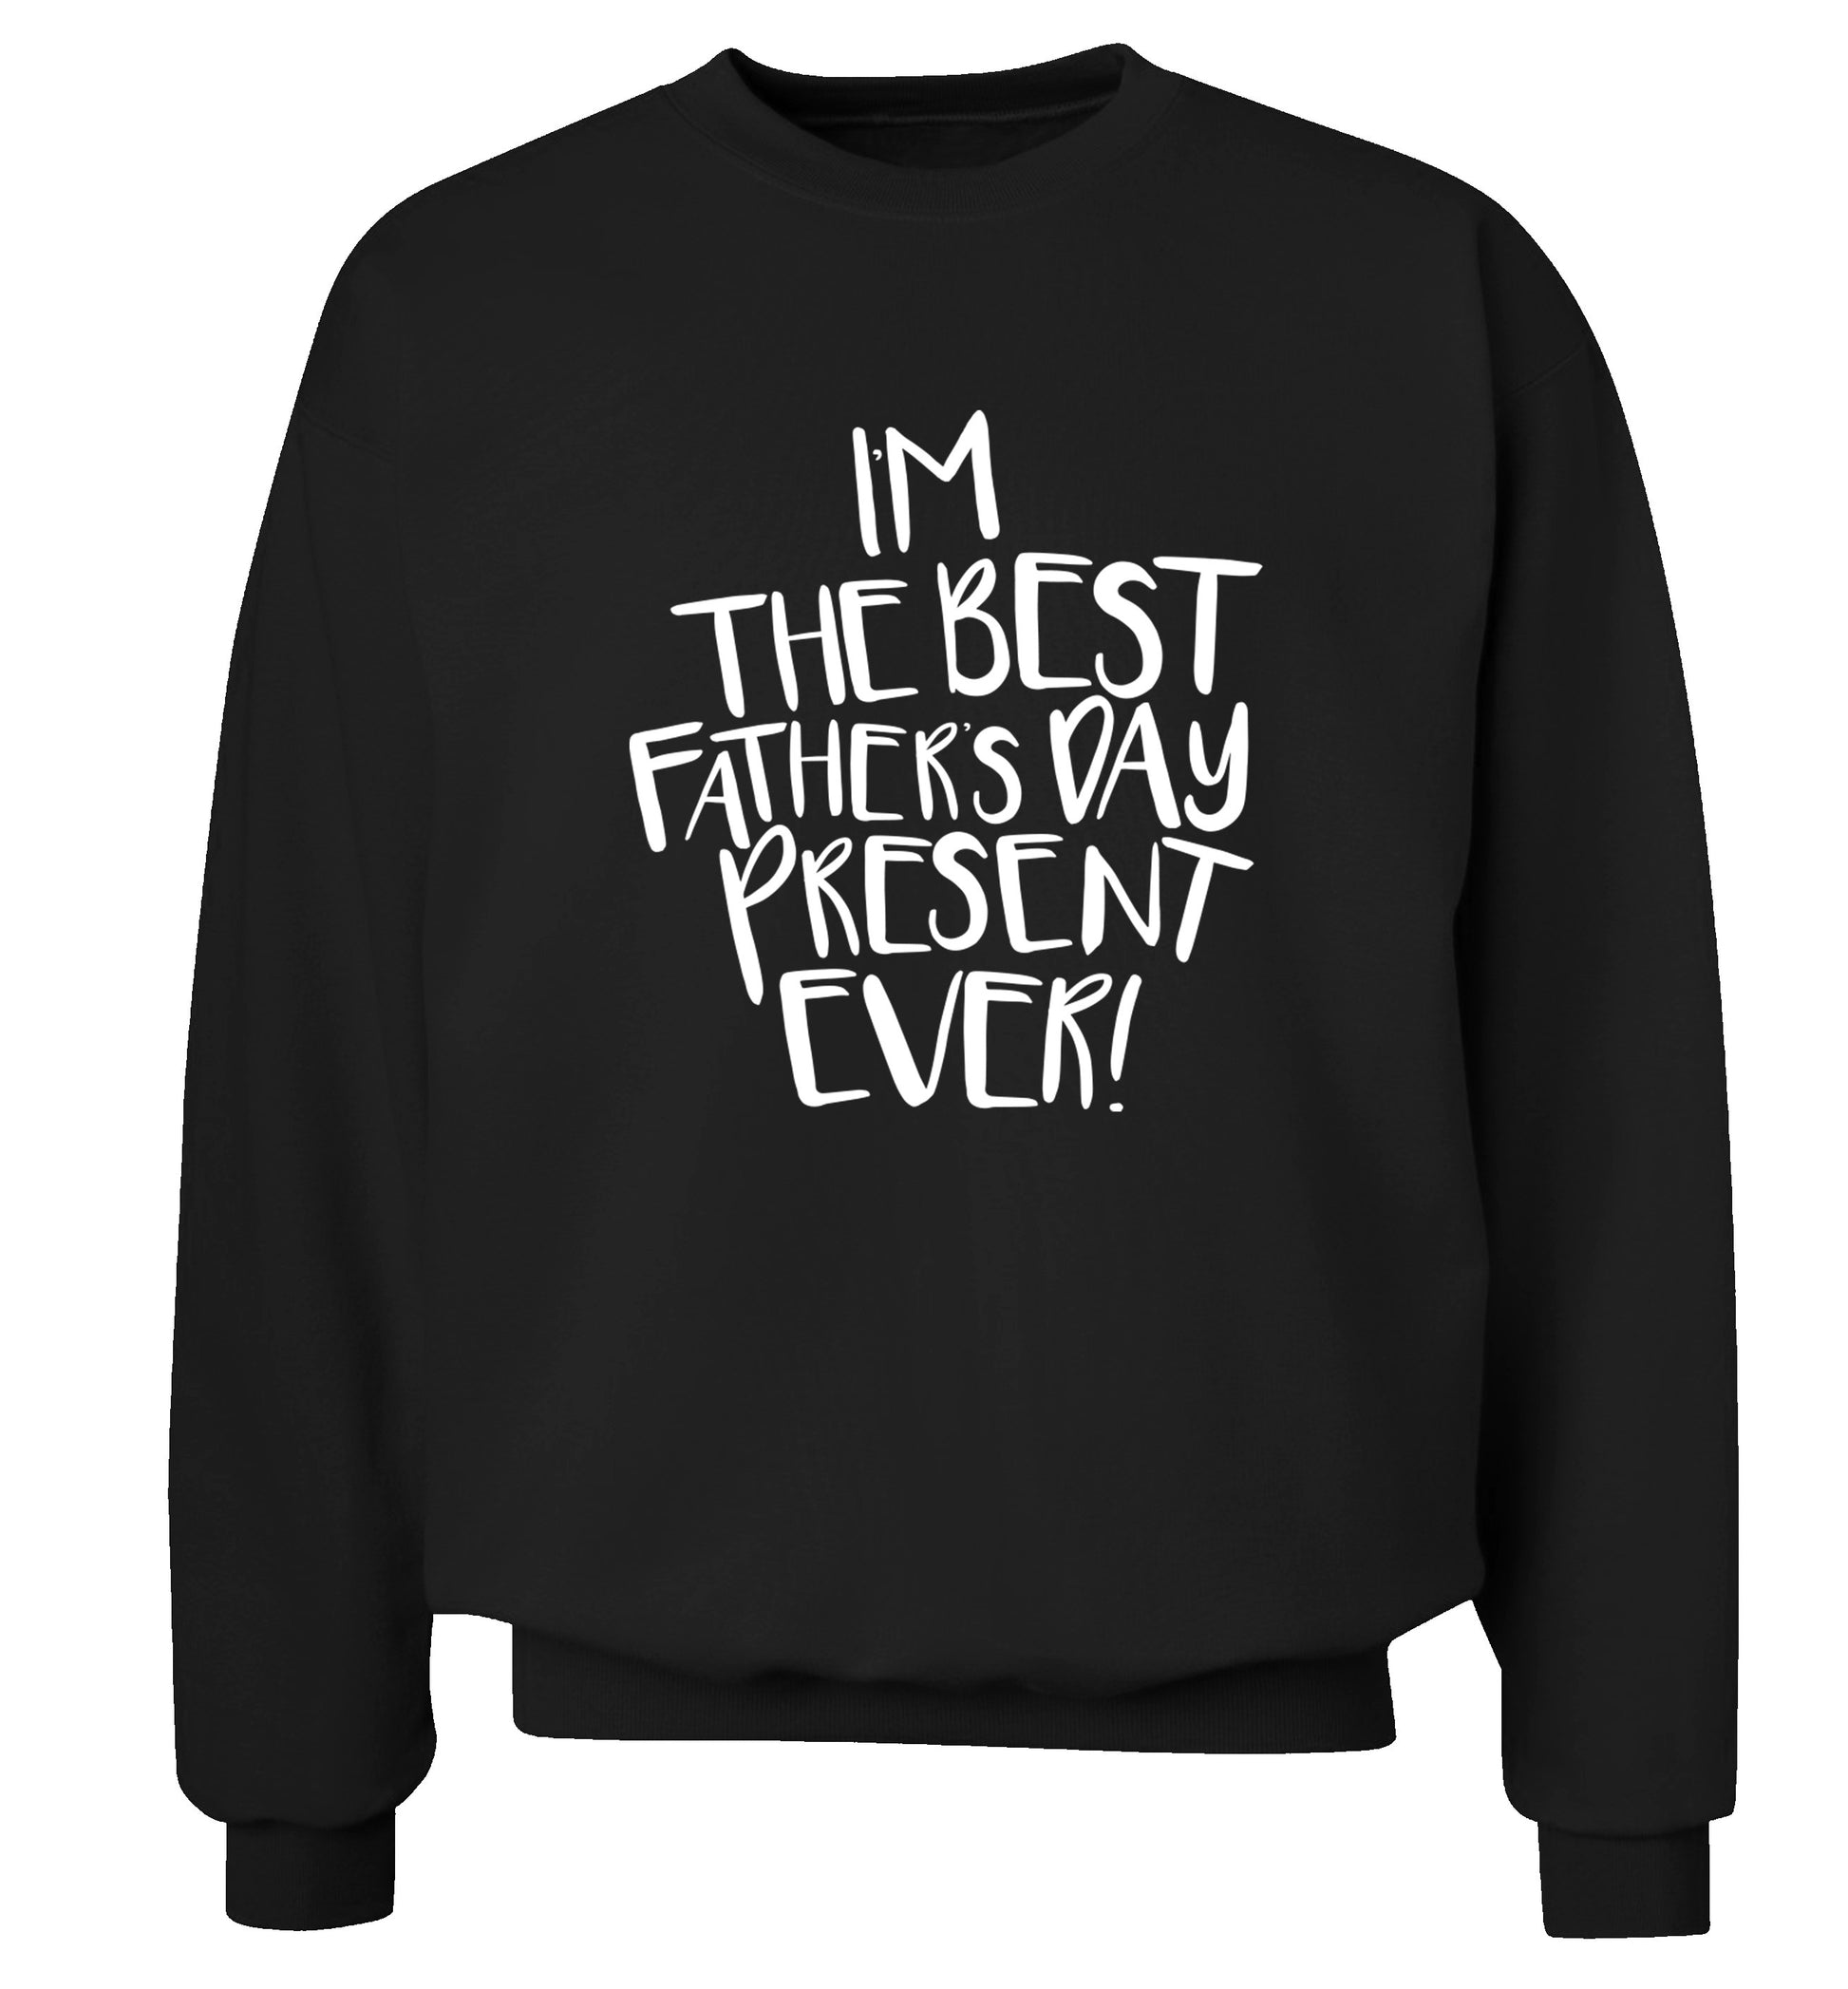 I'm the best father's day present ever! Adult's unisex black Sweater 2XL